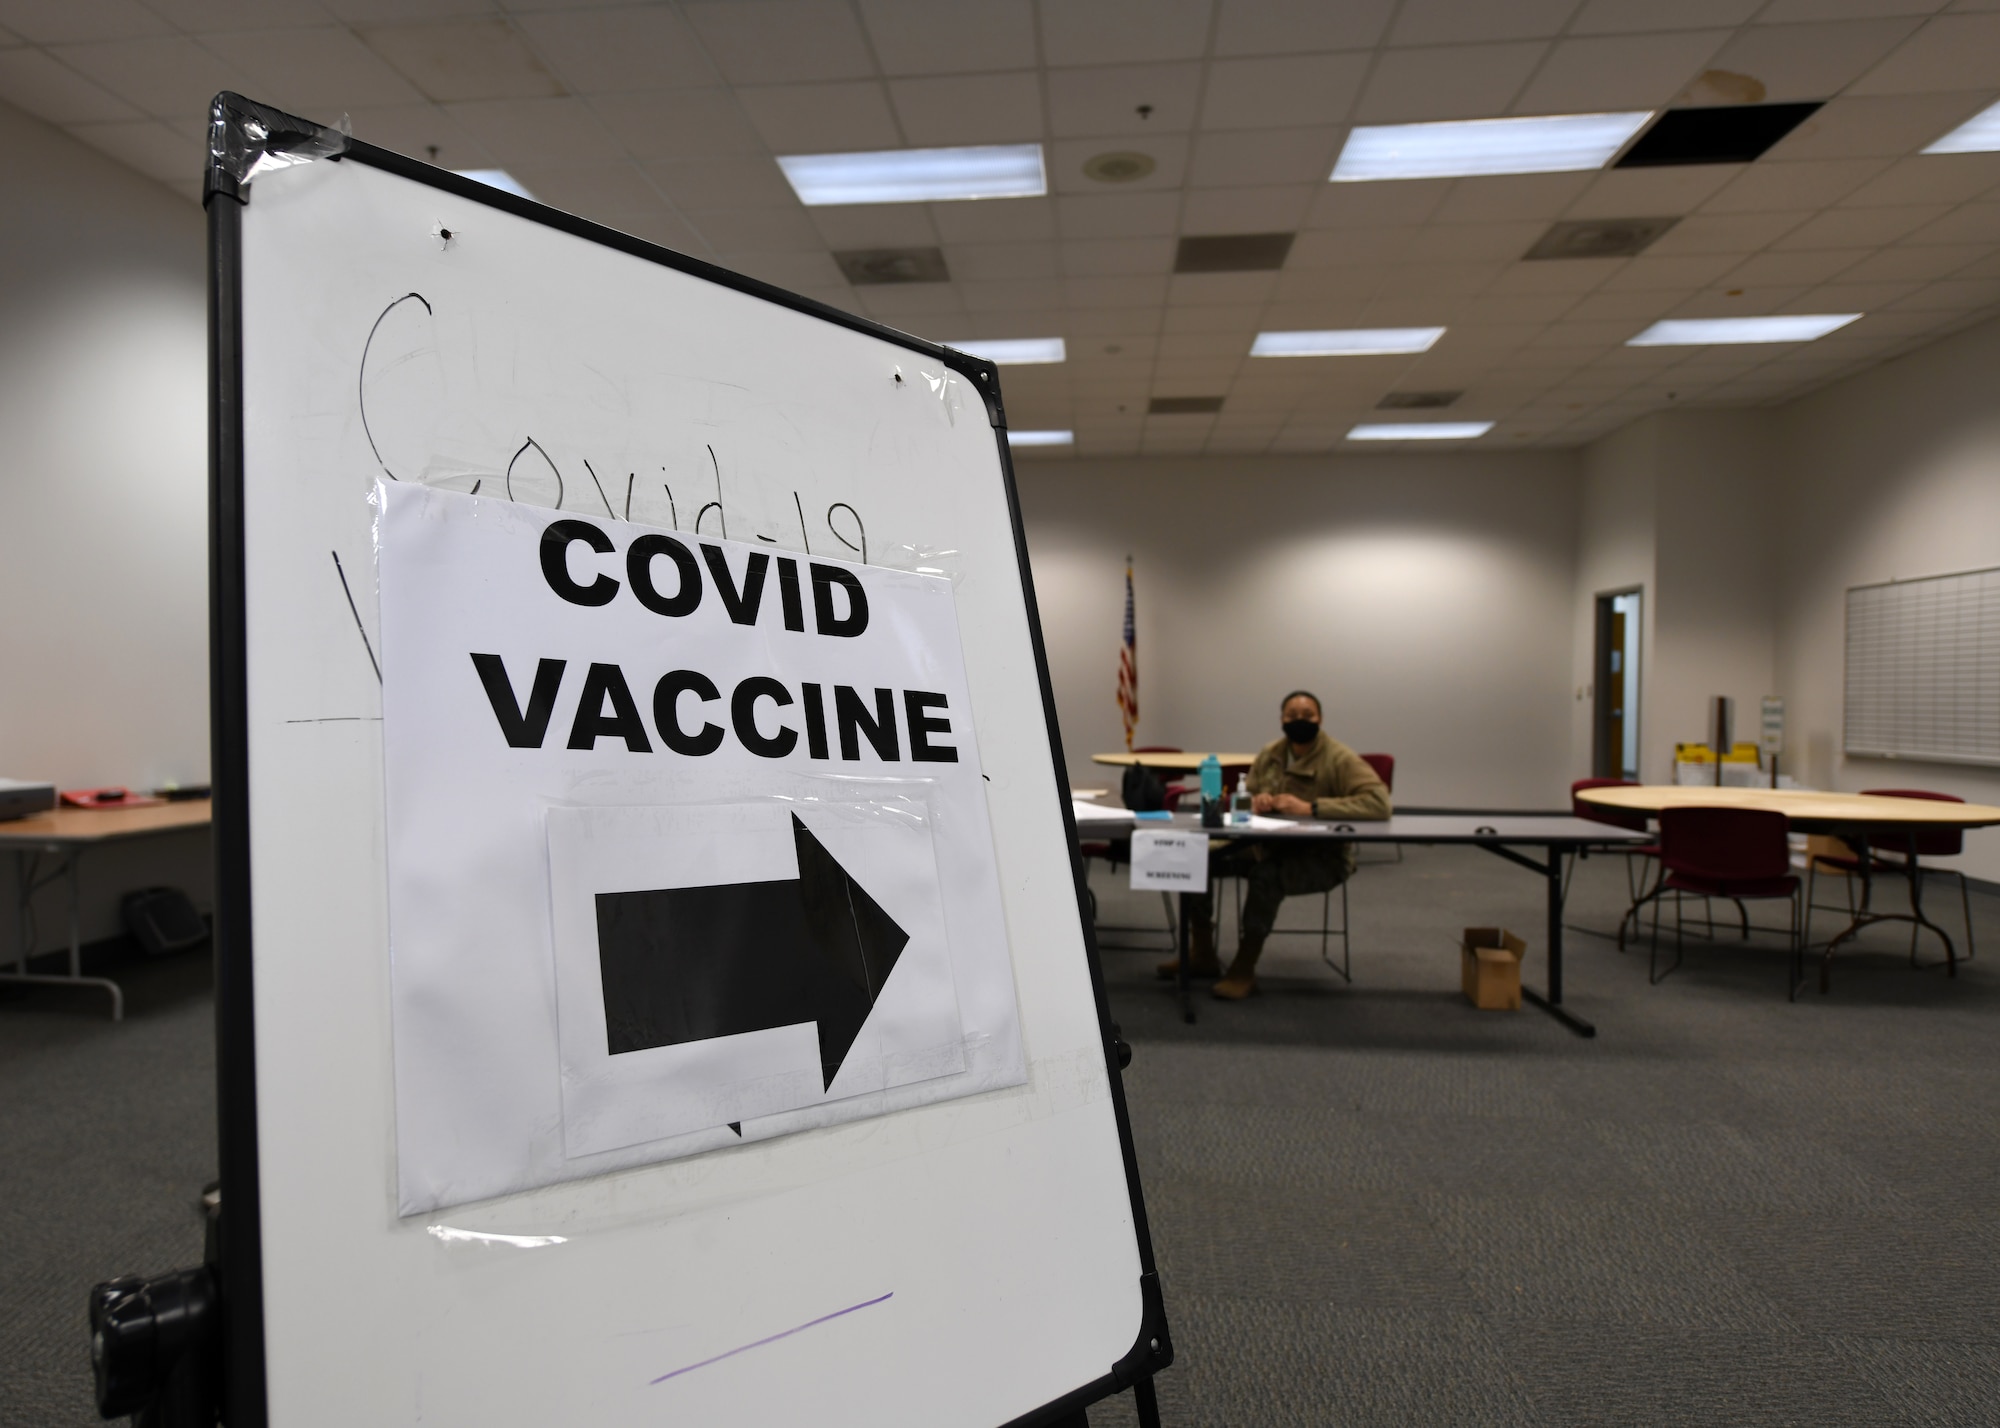 A sign reading "COVID Vaccine" with a black arrow pointing to the right.